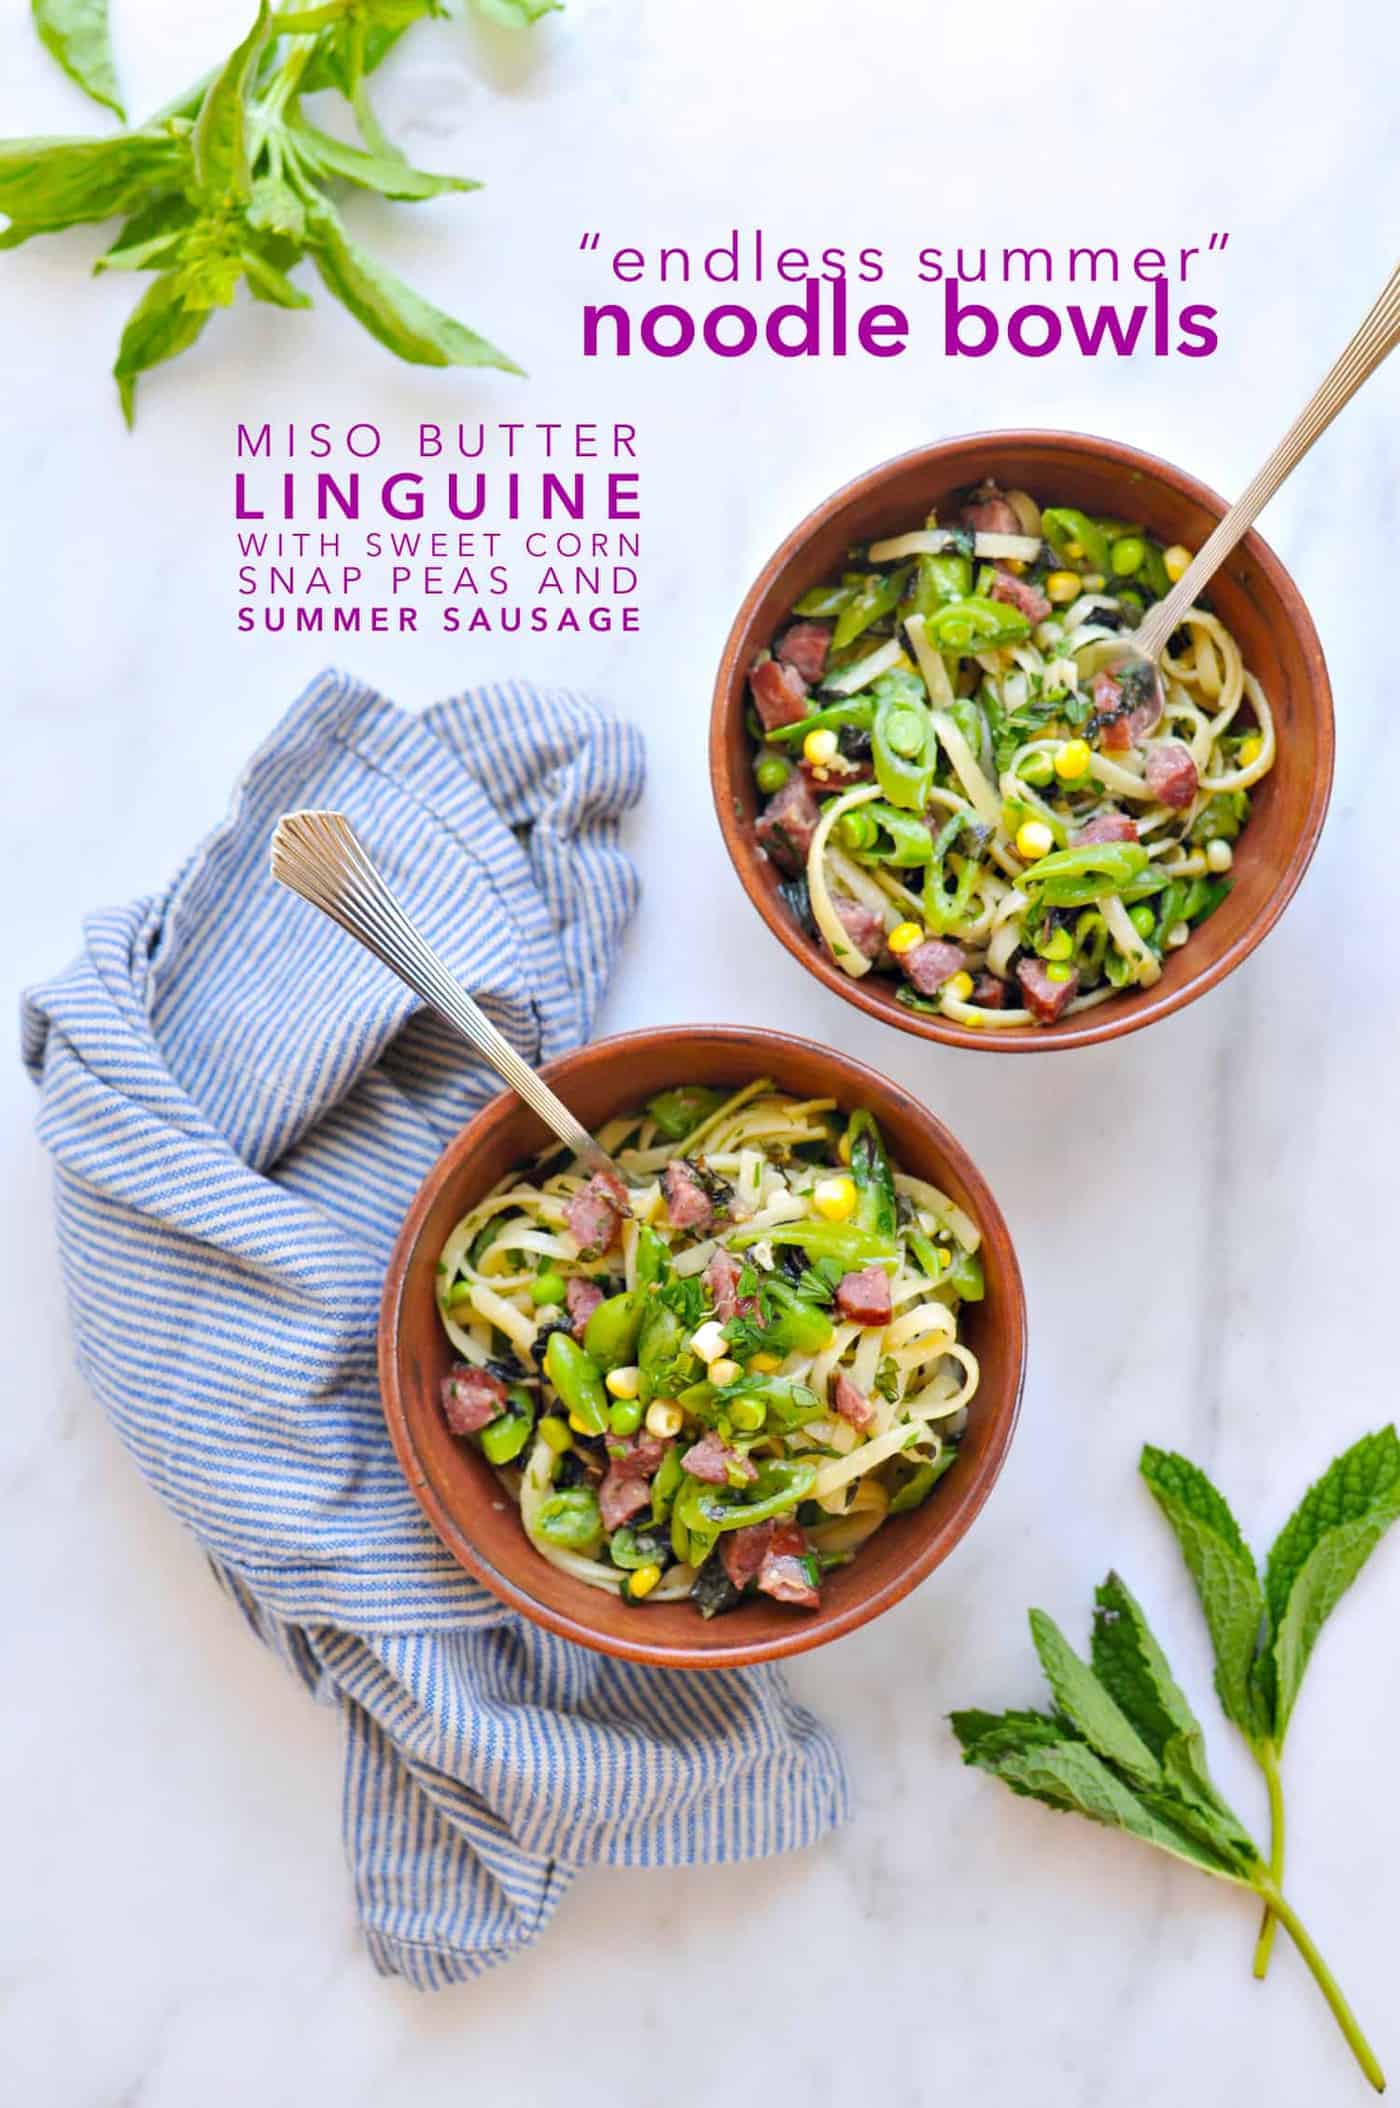 Endless Summer Noodle Bowls: Miso Butter Linguine with Sweet Corn, Snap Peas + Summer Sausage recipe (via thepigandquill.com) #pasta #veggies #basil